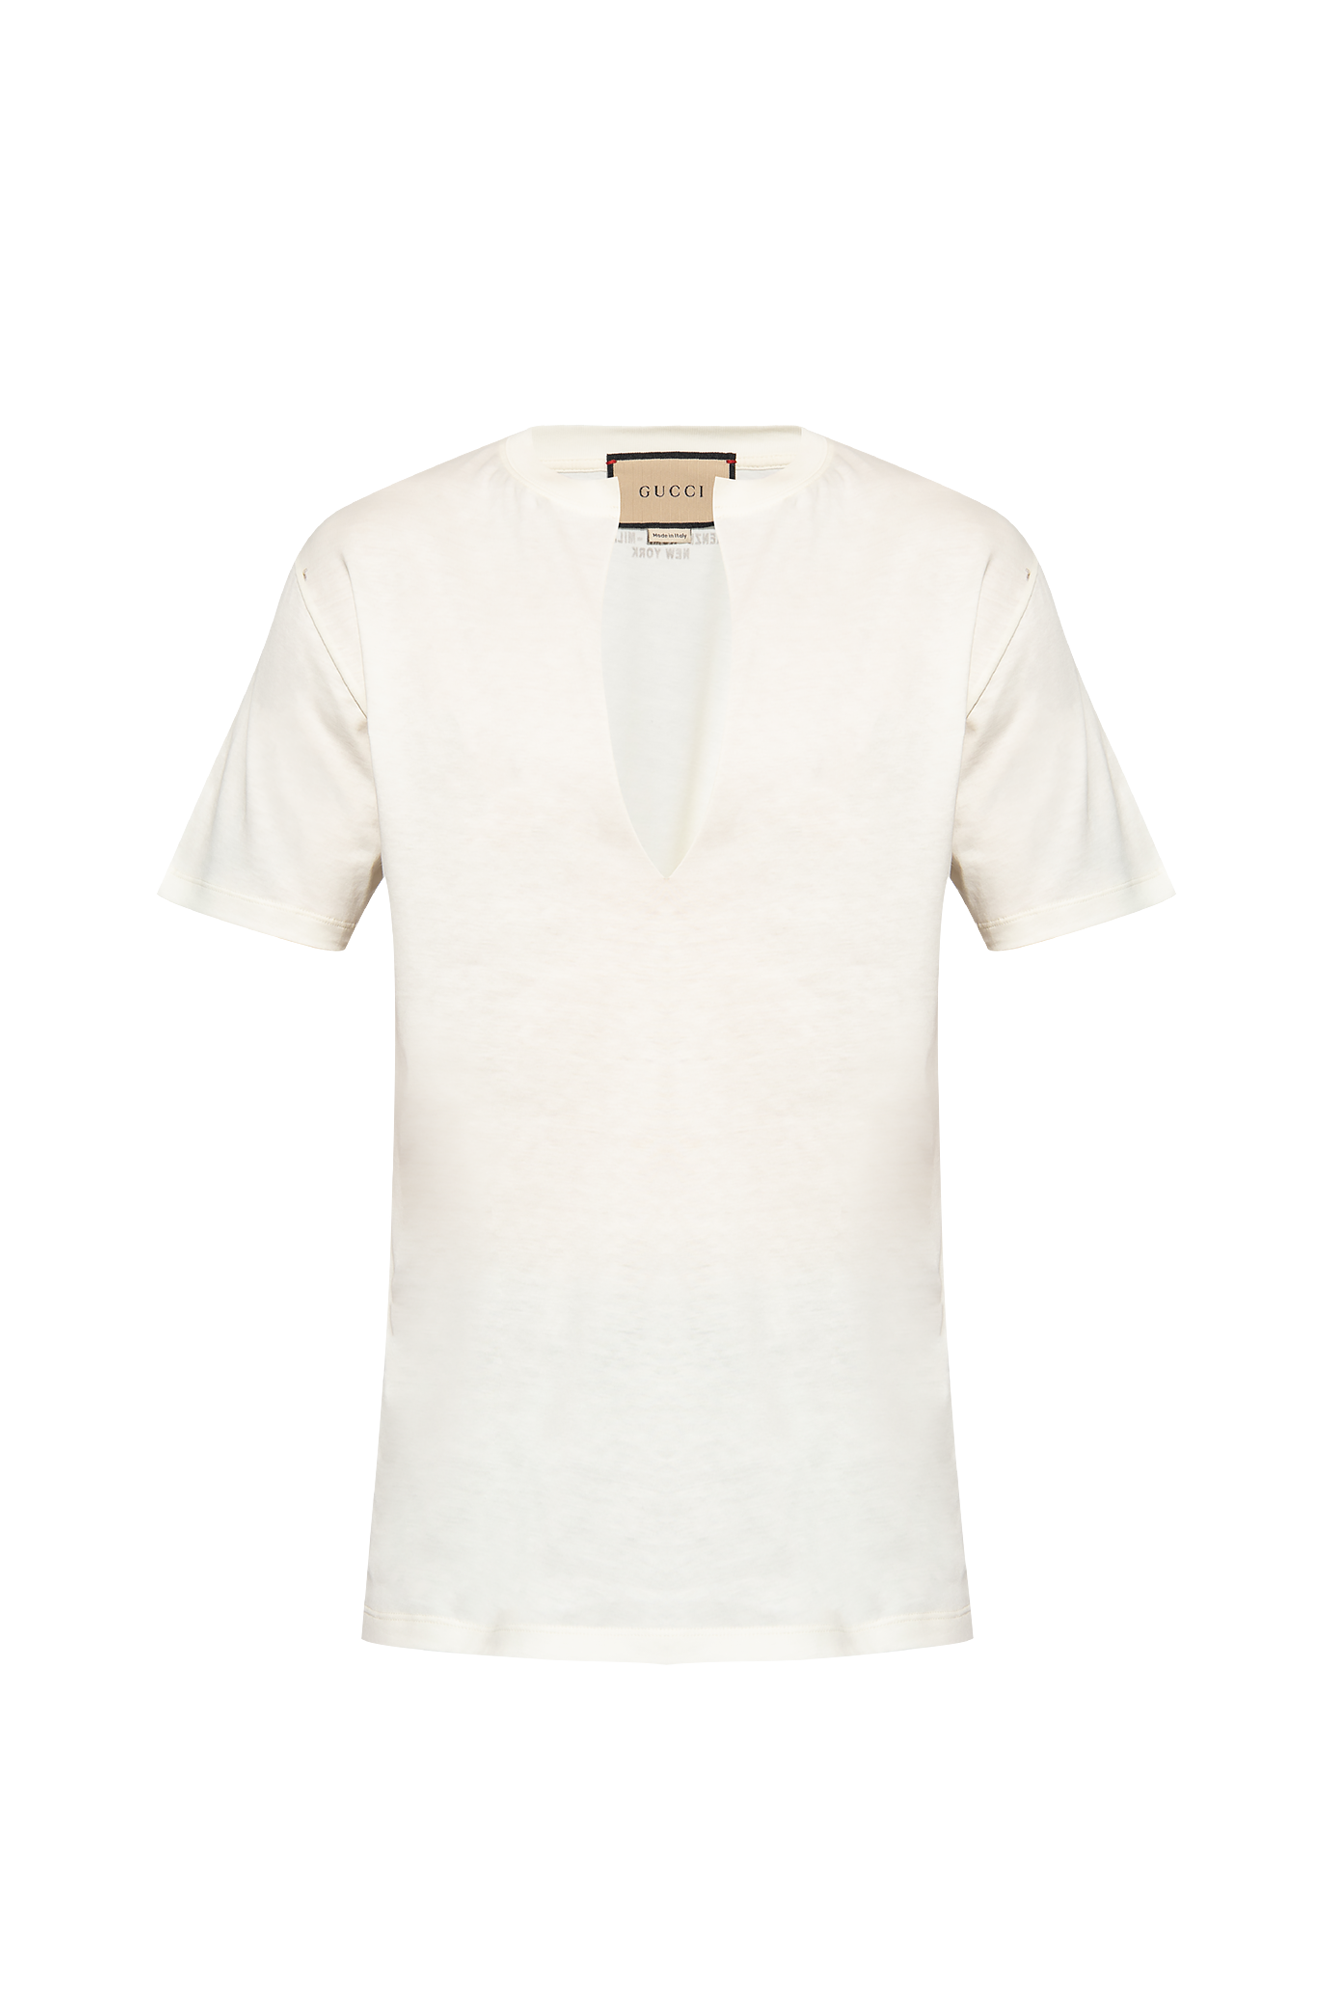 Gucci T-shirt with open neck | Men's Clothing | Vitkac